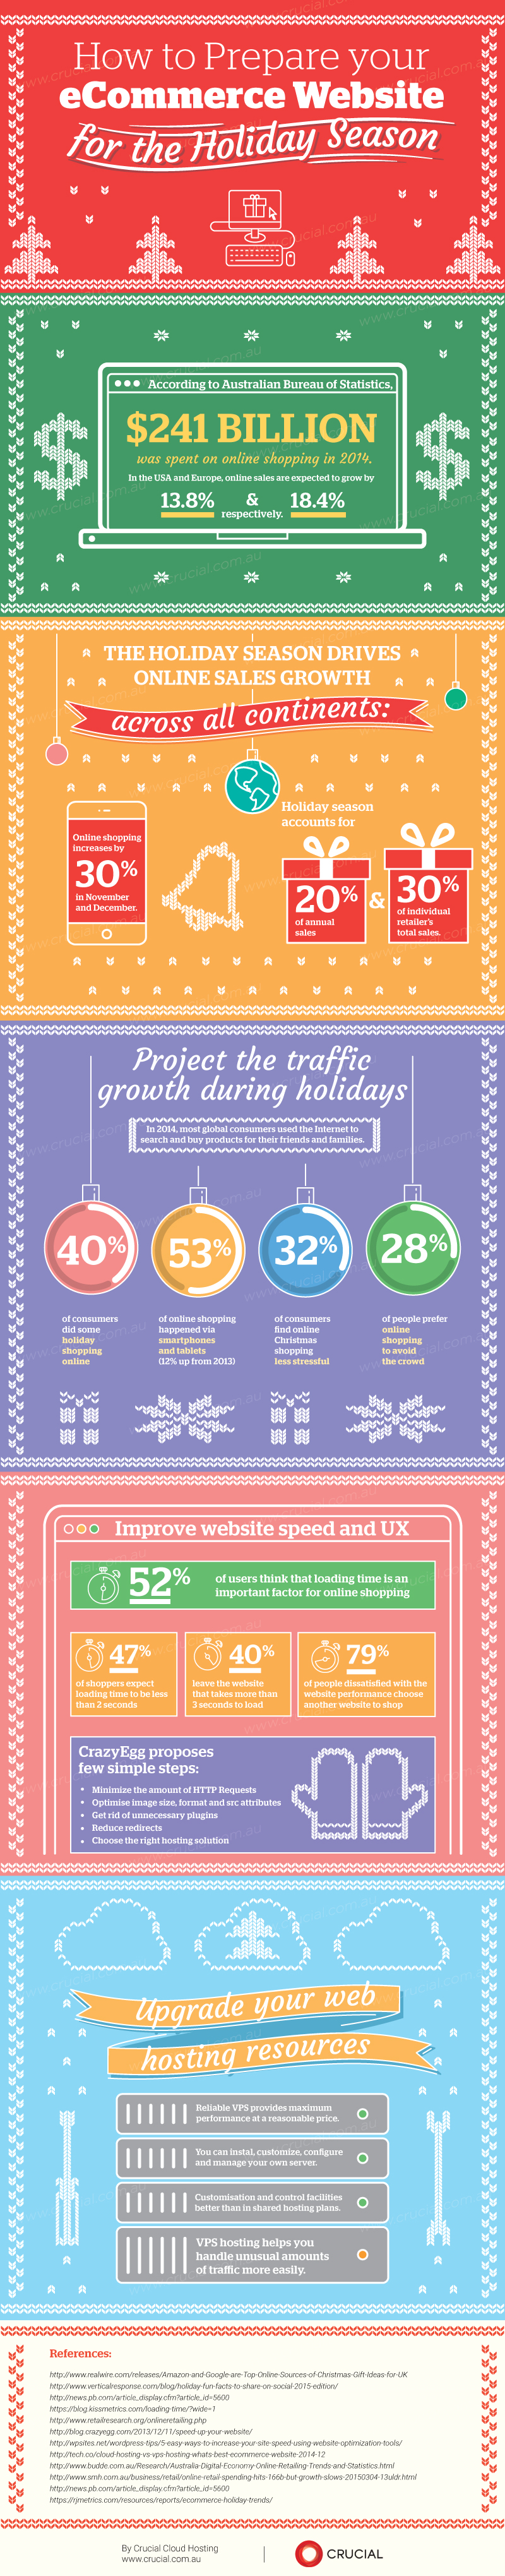 How-to-Prepare-your-eCommerce-Website-for-the-Holiday-Season